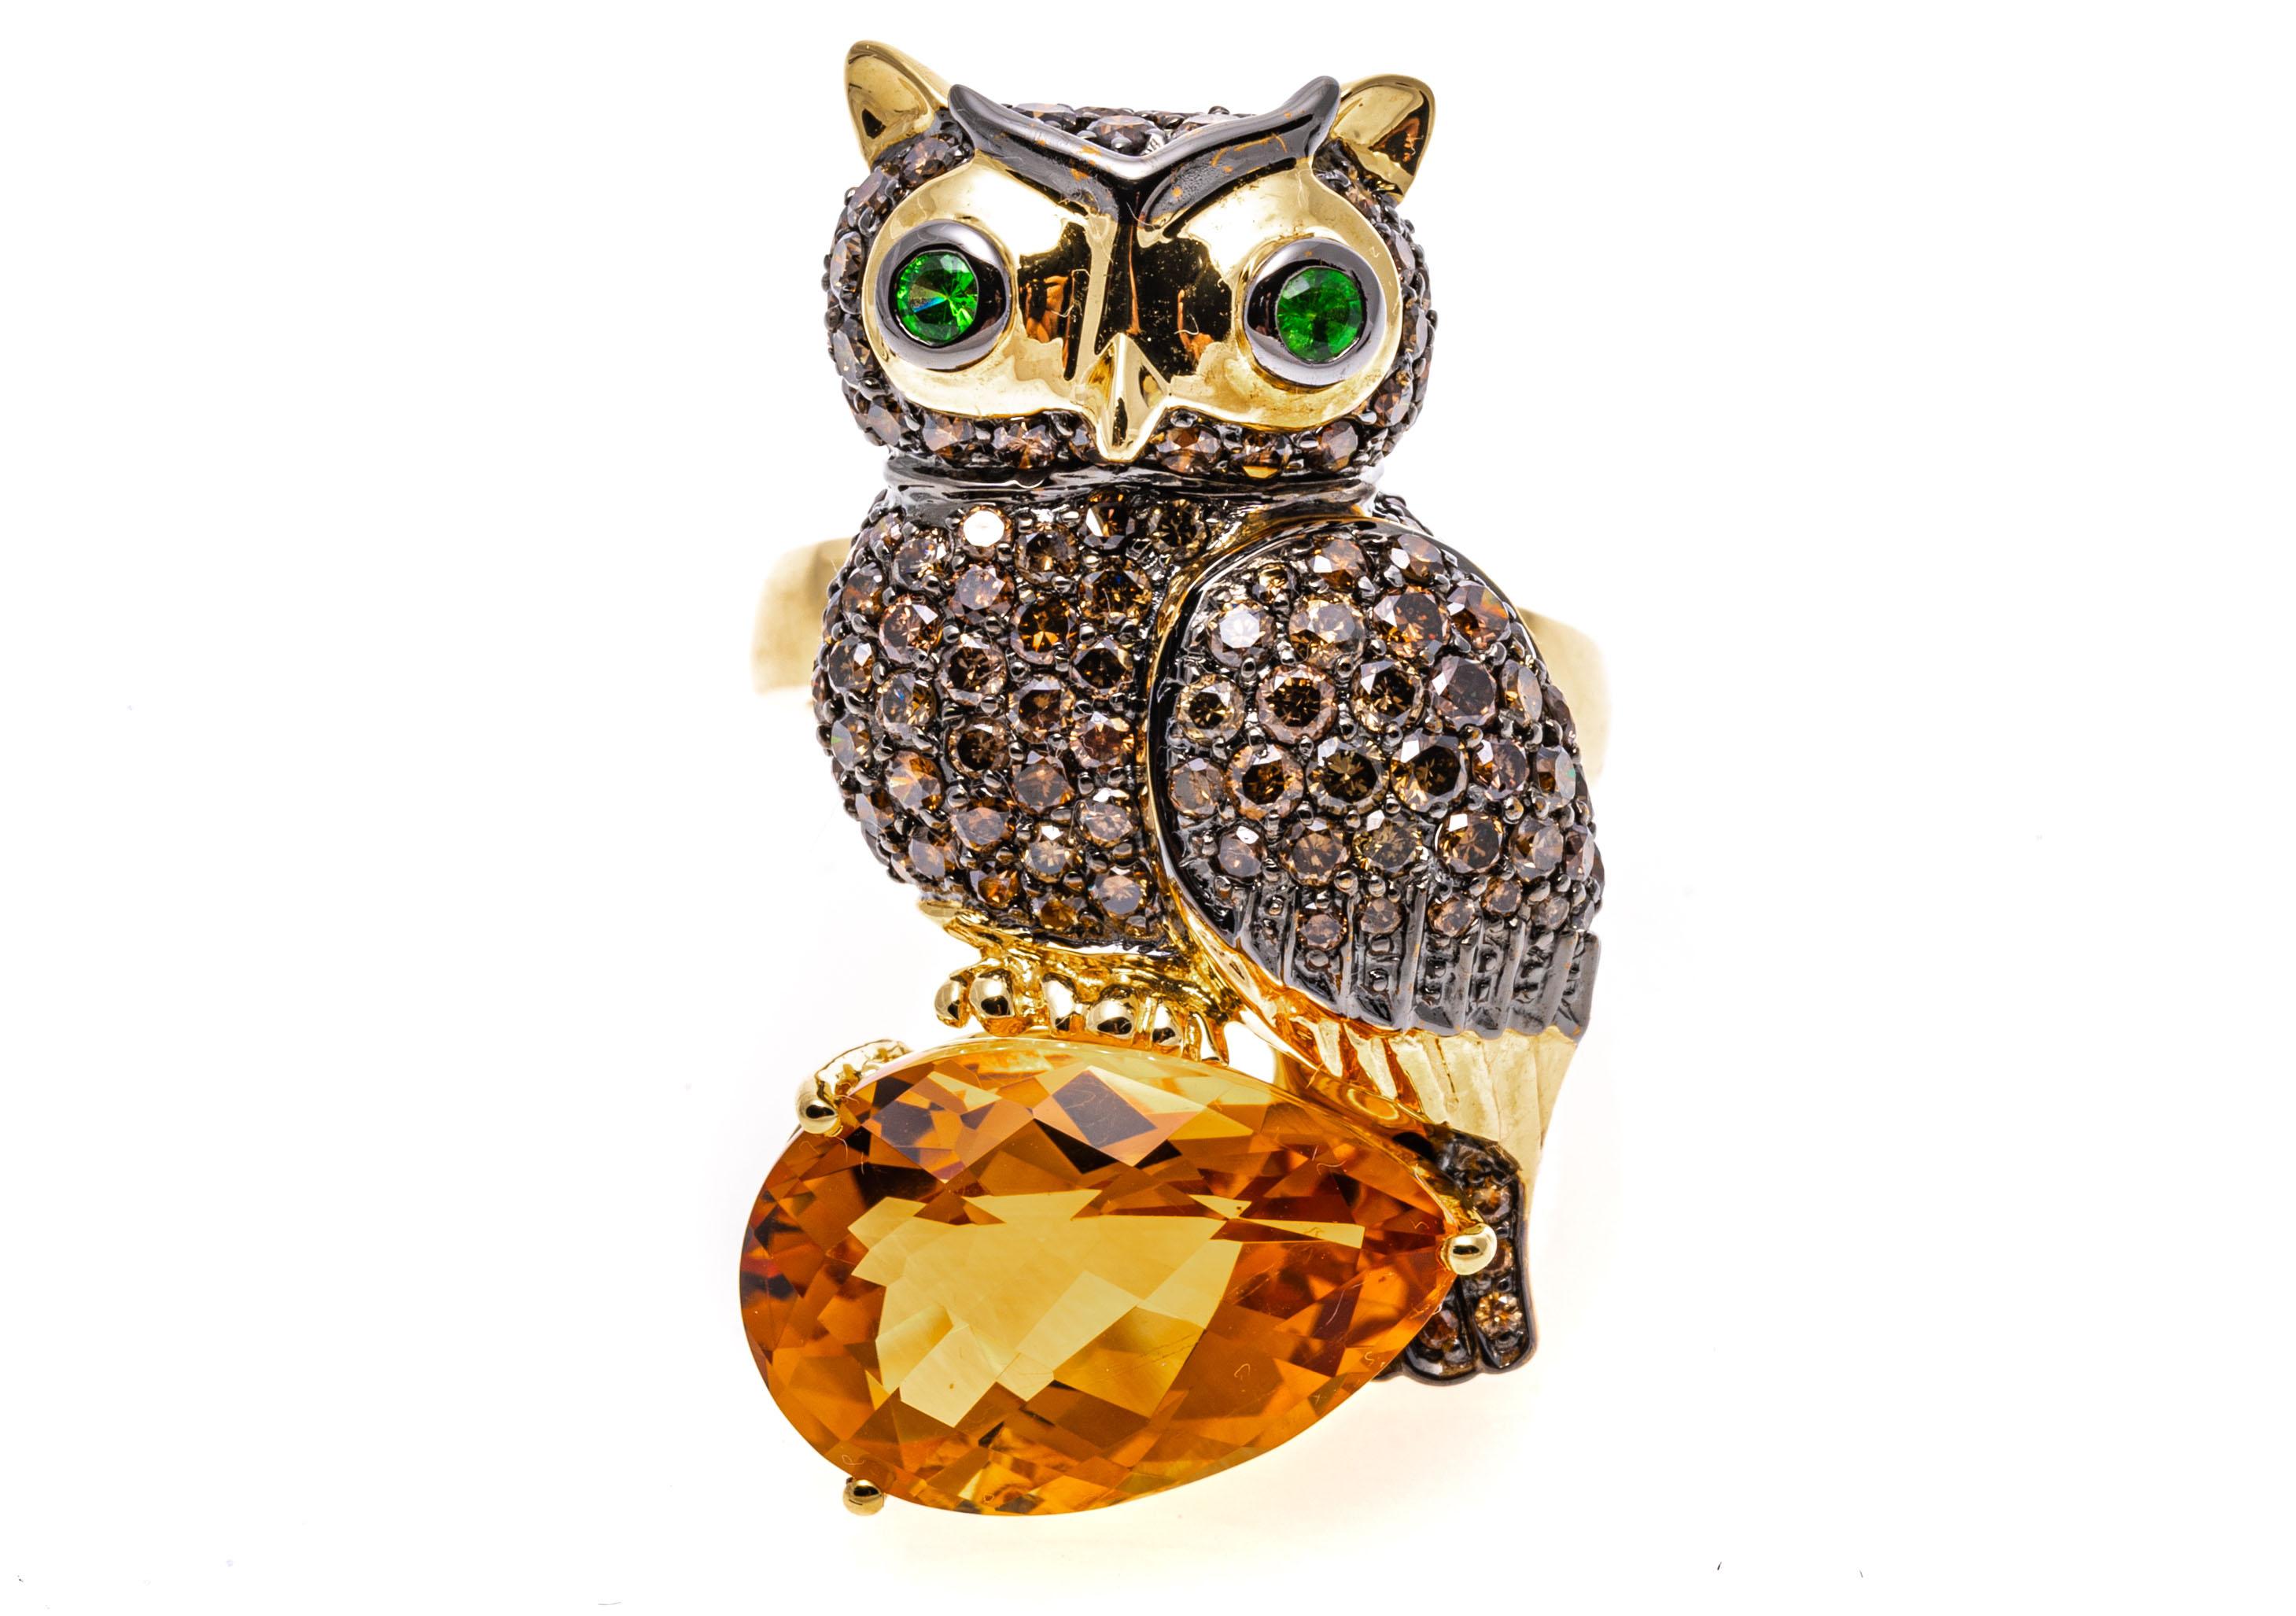 18k Gold Cognac Diamond Owl Ring/Pendant Set with Tourmaline and Citrine For Sale 7